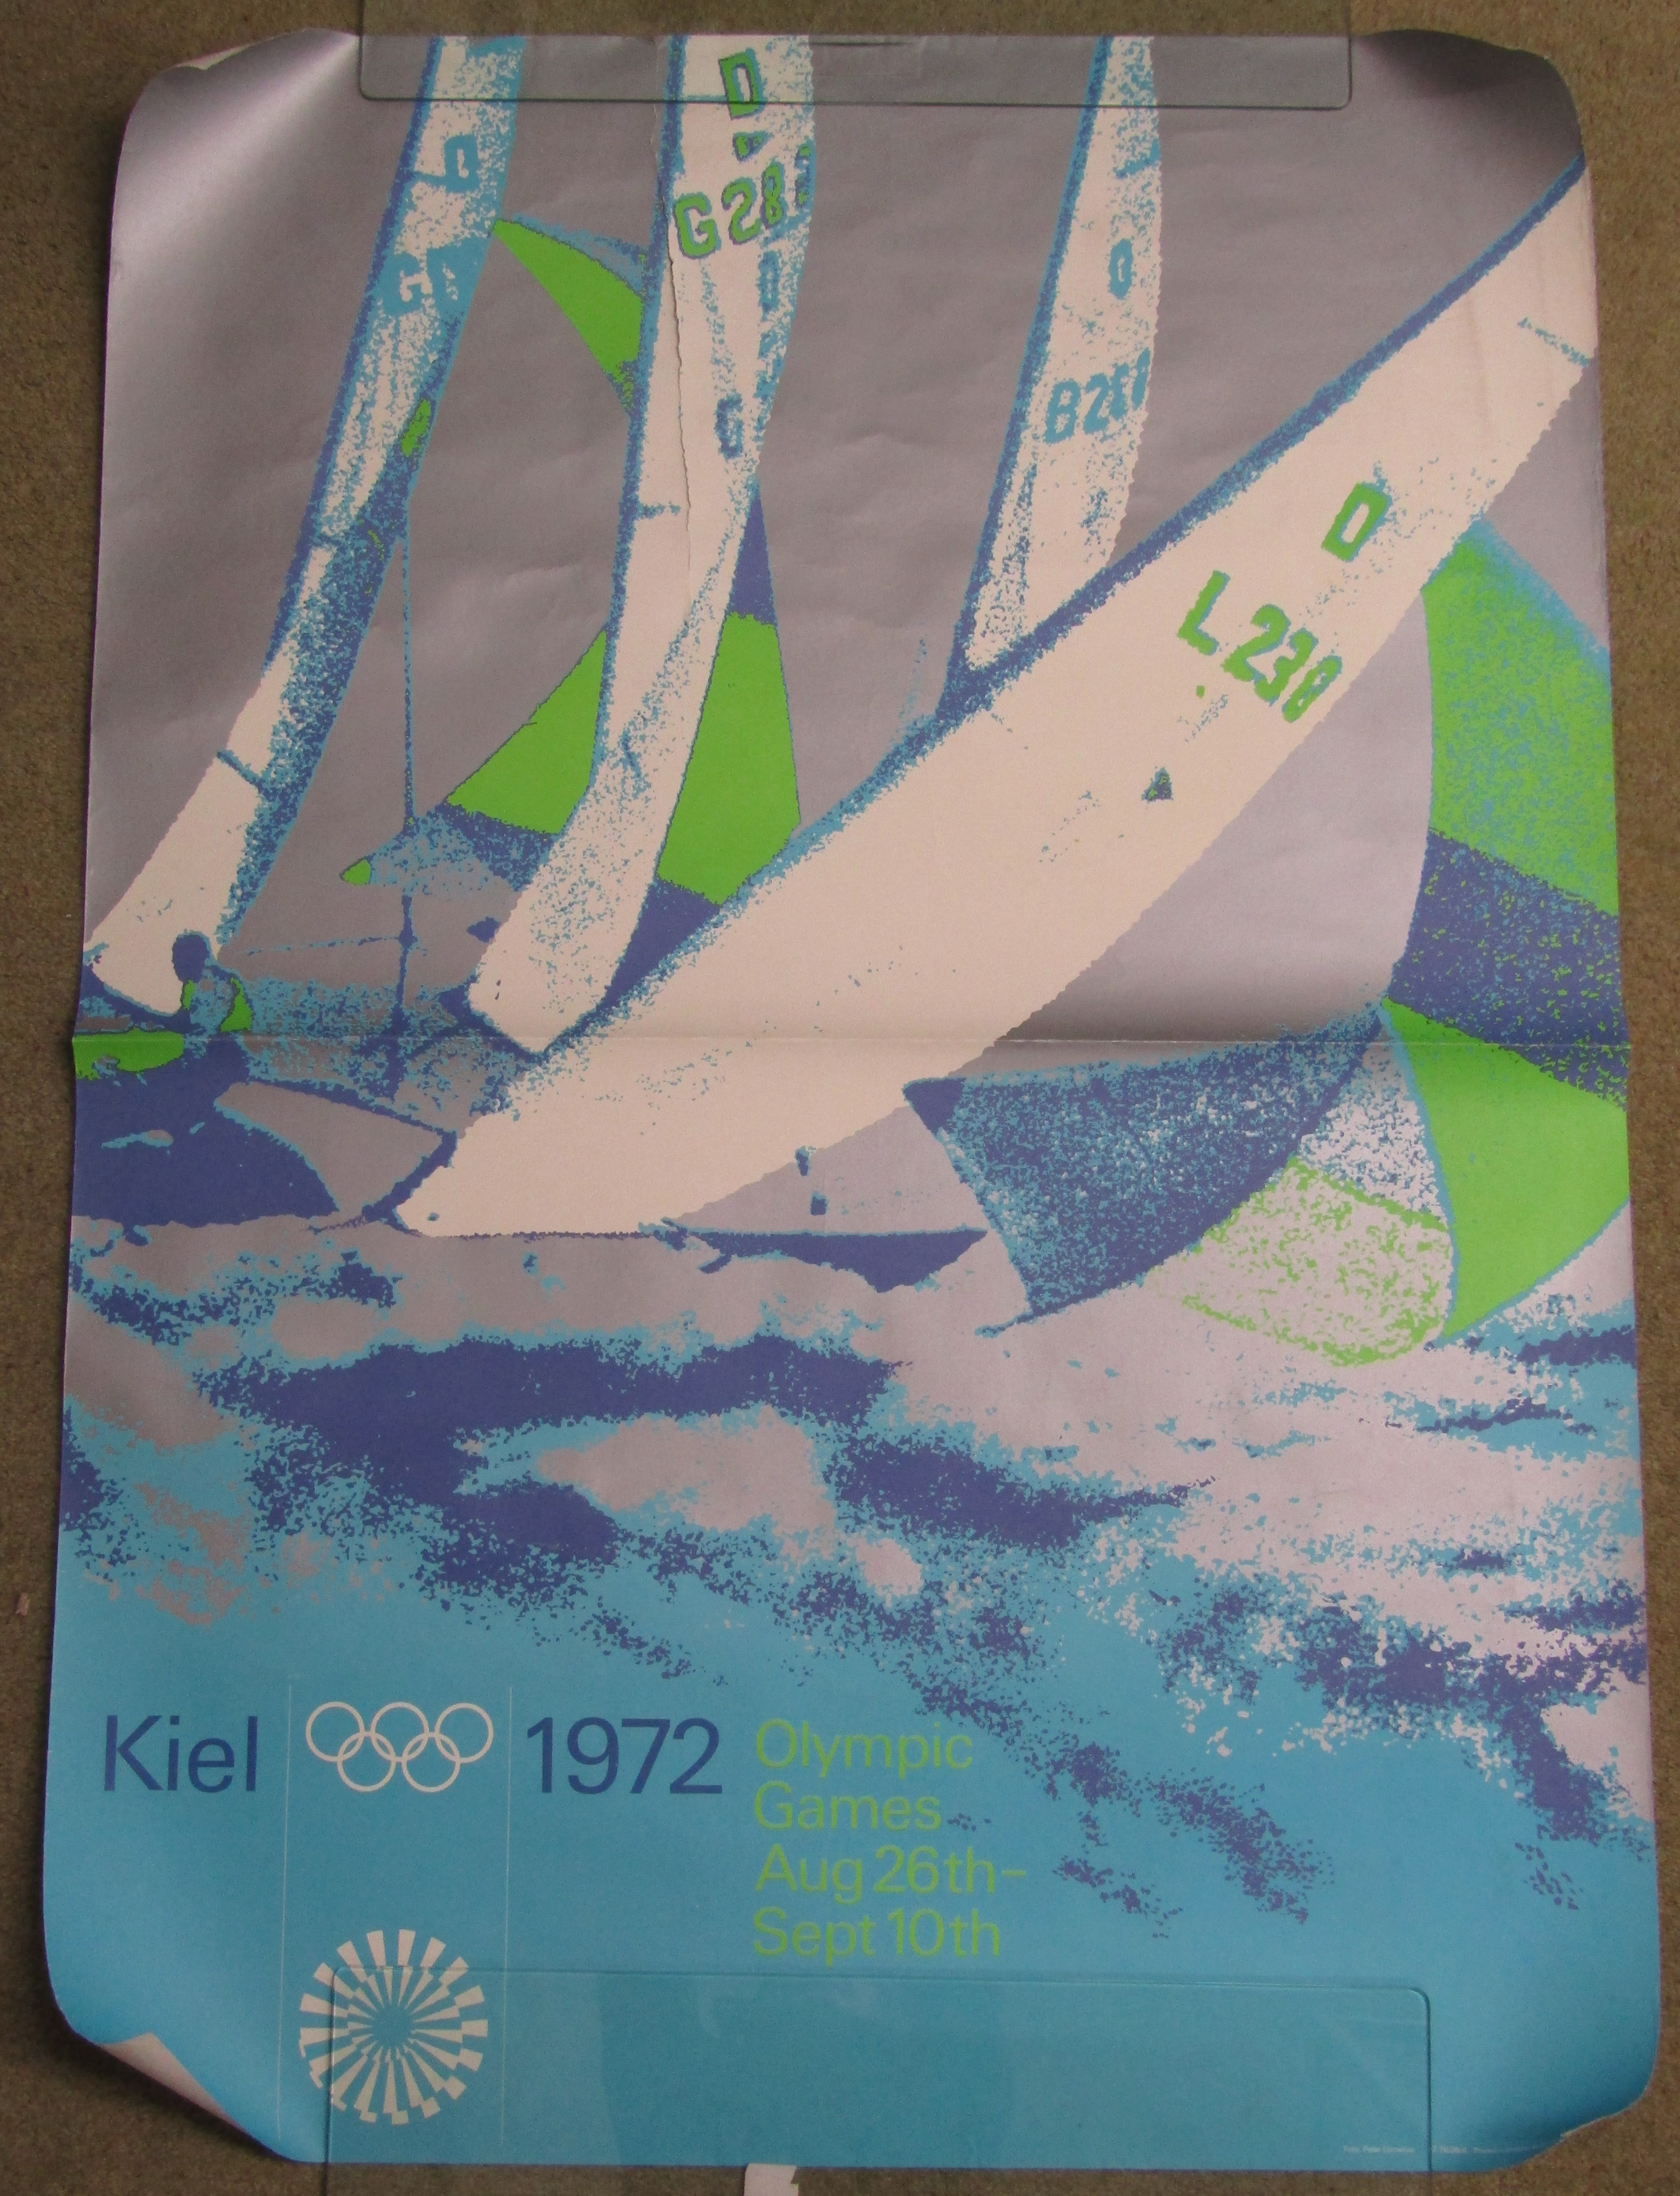 3 x 1972 Aug 26th - Sept 10th Olympic Games posters - Fencing Munchen - Munich Cycling - Kiel - Image 2 of 5